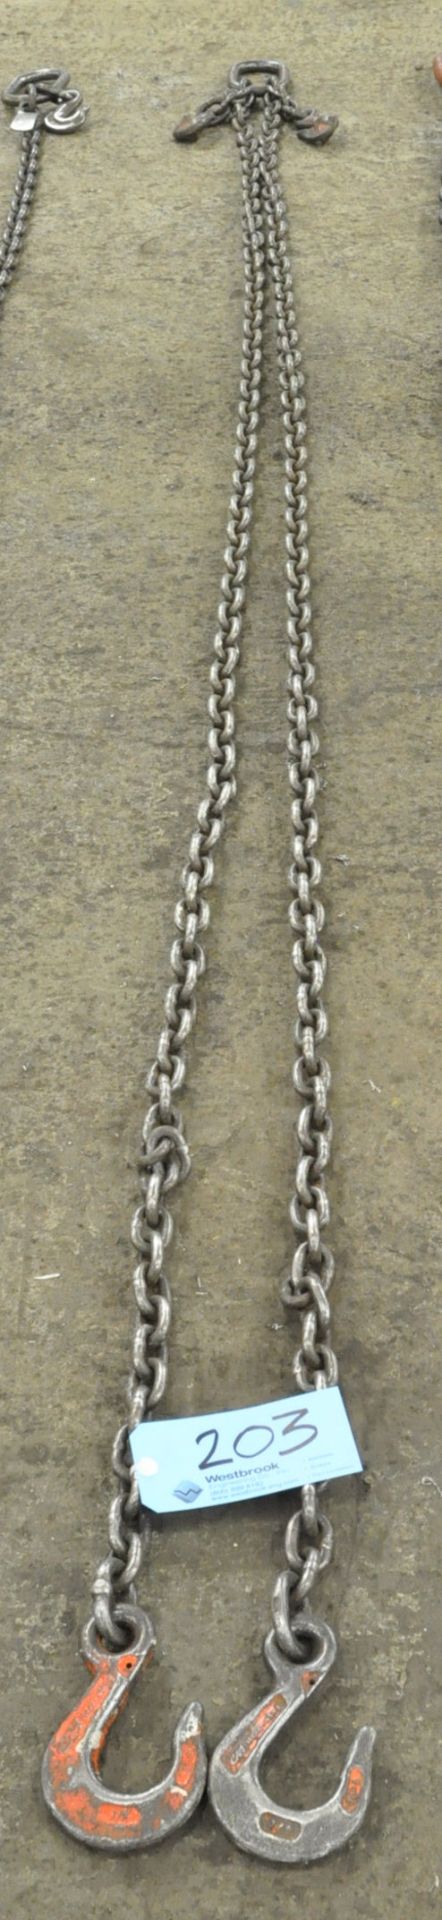 3/8" Link x 10' 2-Hook Chain Sling with (2) Chokers